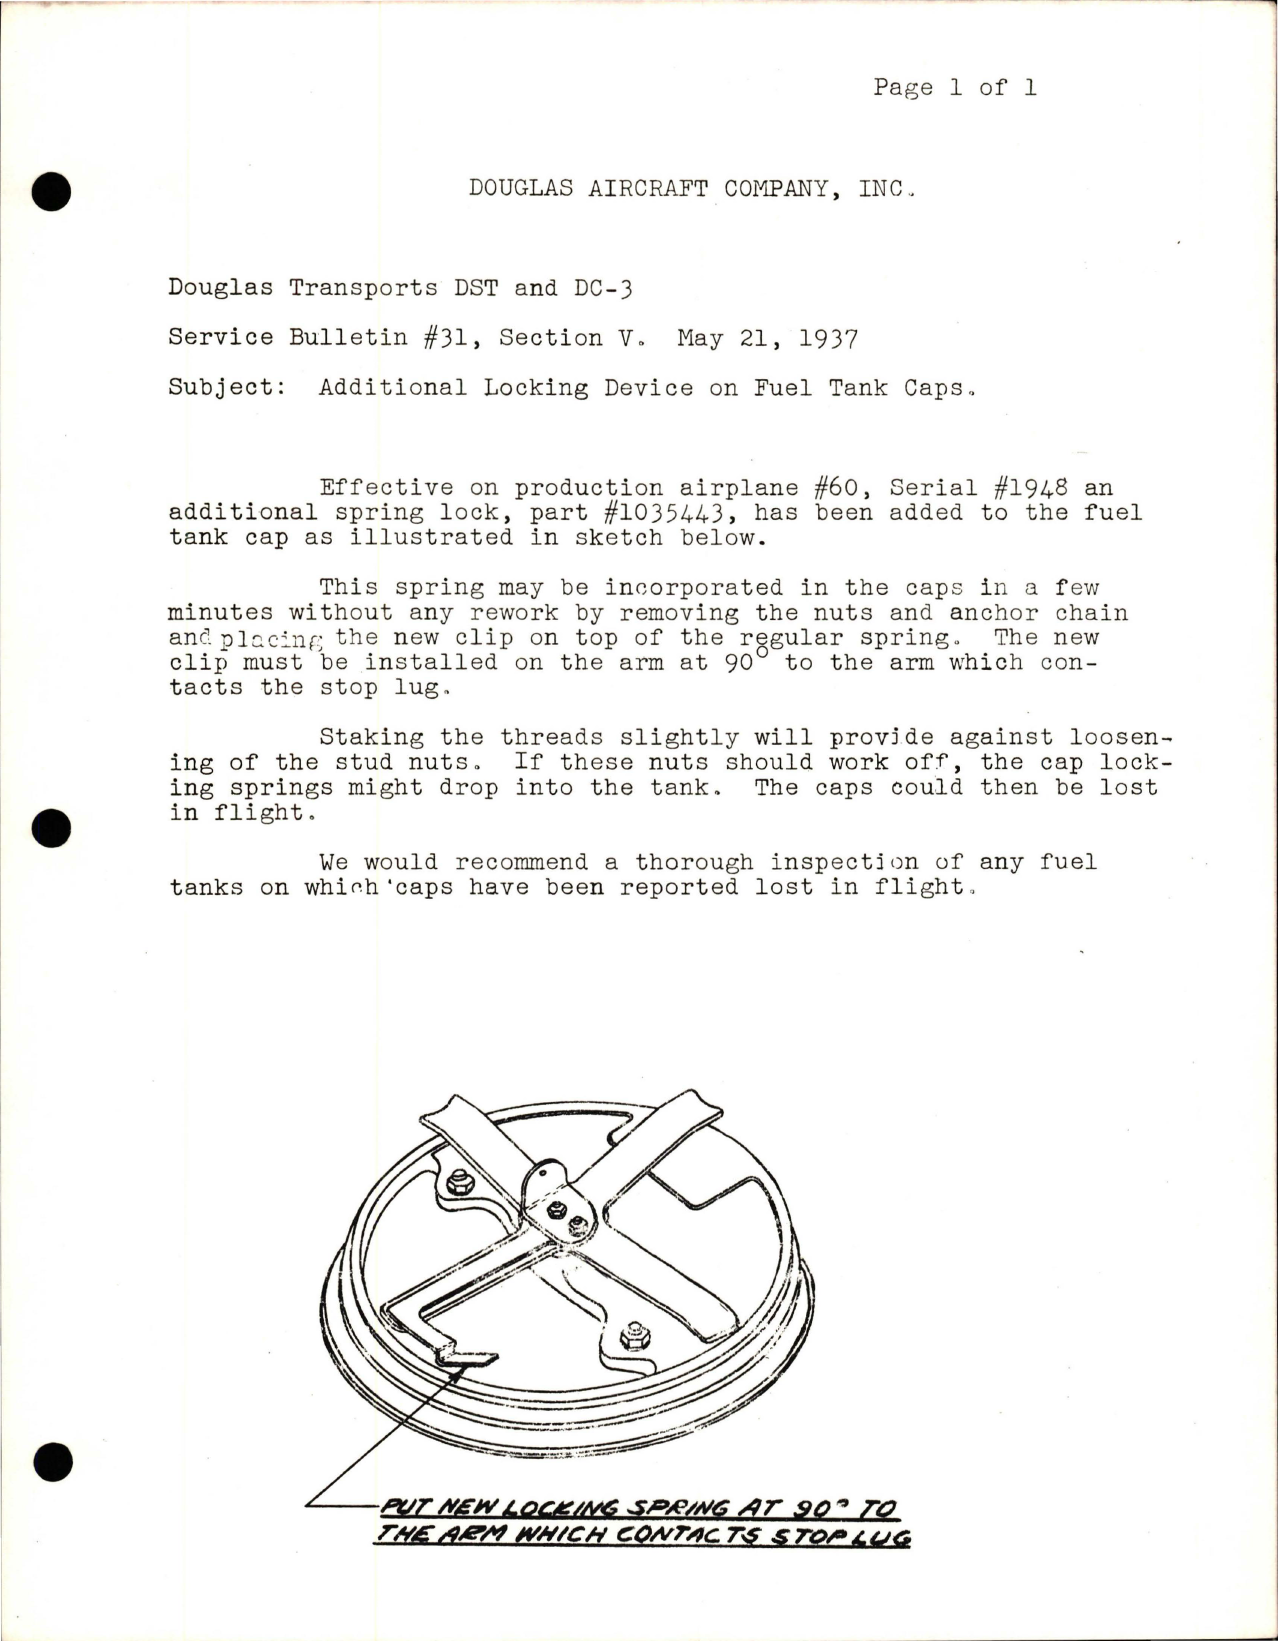 Sample page 1 from AirCorps Library document: Additional Locking Device on Fuel Tank Caps